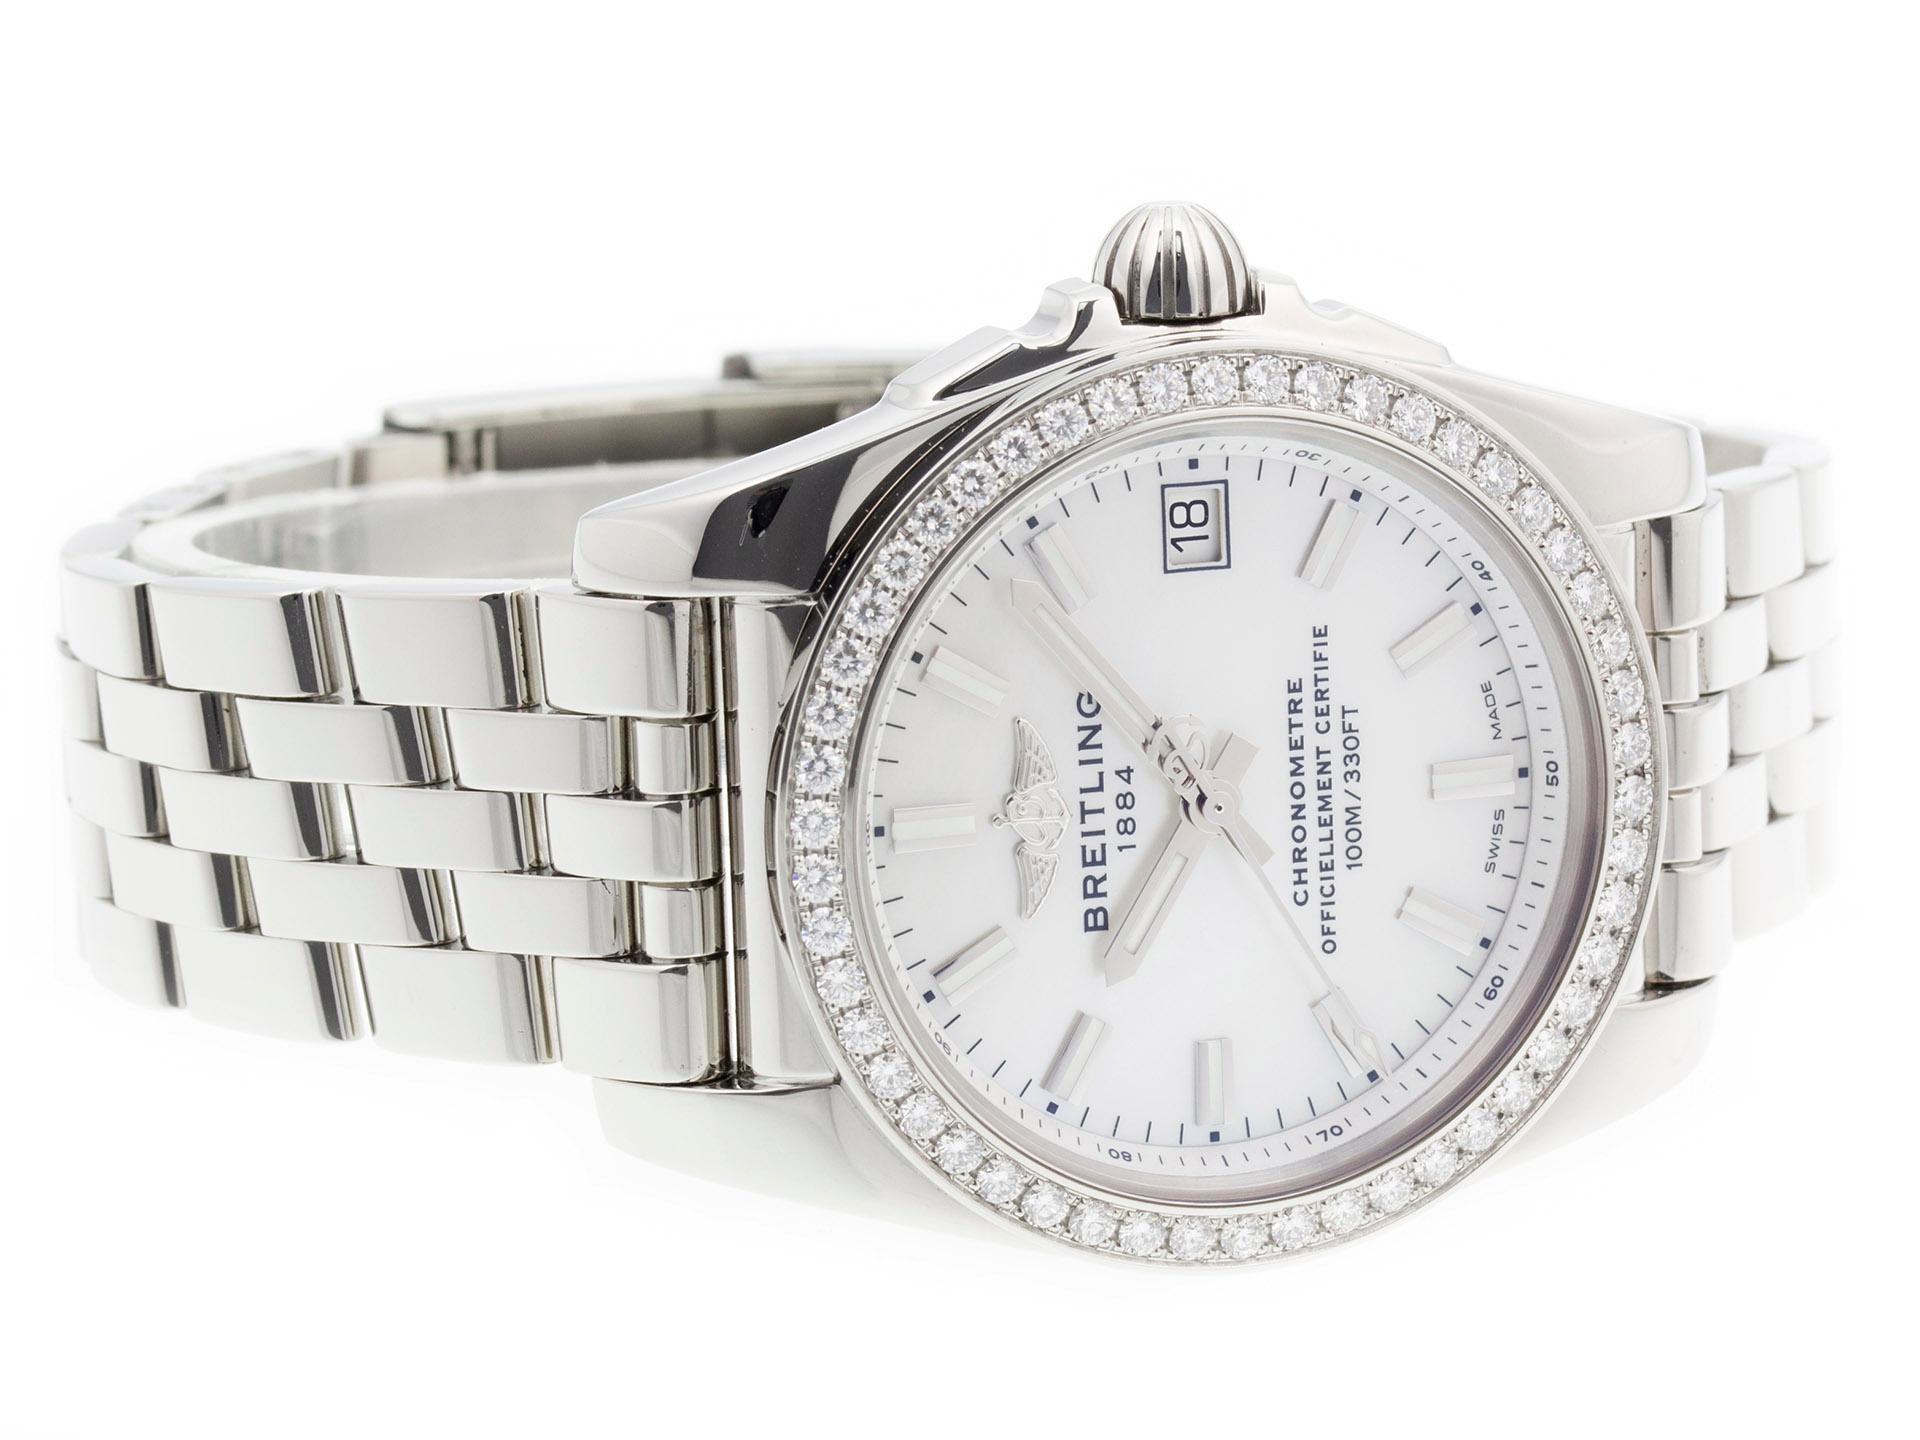 Brand:	Breitling		
Movement:	Breitling Caliber 74, SuperQuartz Chronometer Movement
Series:	Galactic 36 SleekT		
Functions:	Hour, Minute, Second, Date
Model #:	A7433053/A779​			
Gender:	Ladies’		
Condition:	Excellent Display Model, A Couple Tiny